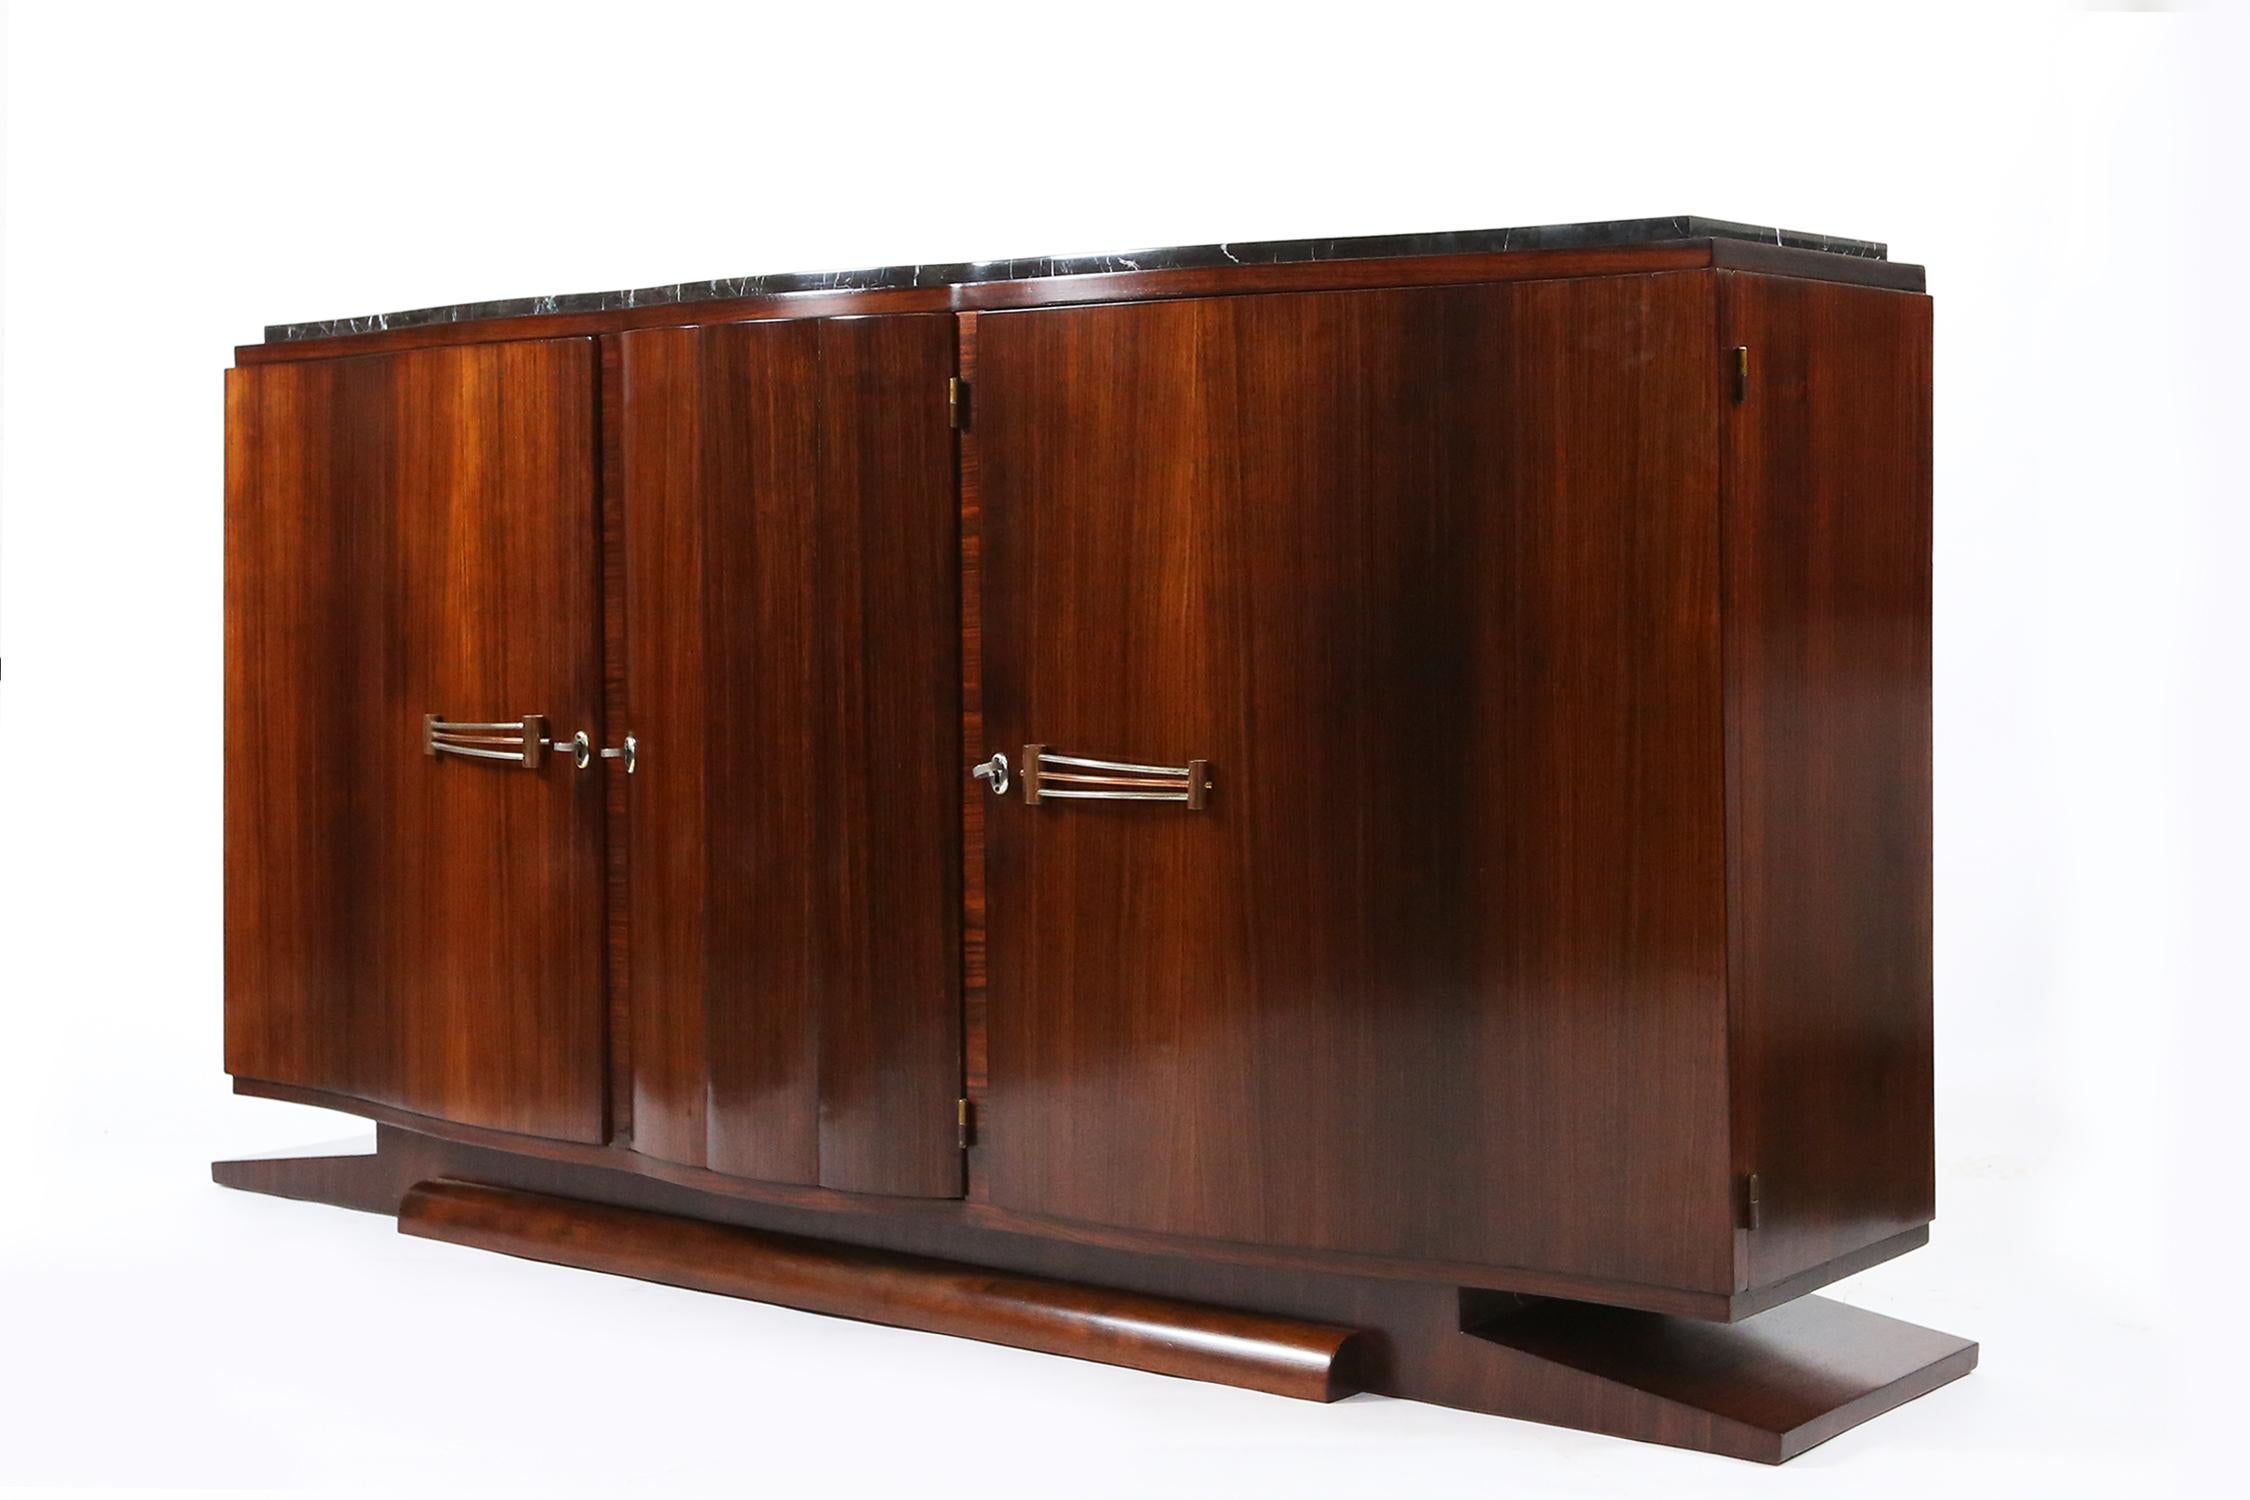 Art Deco Art-Deco Walnut and Black Marble Sideboard from De Coene Frères, Belgium 1930s For Sale